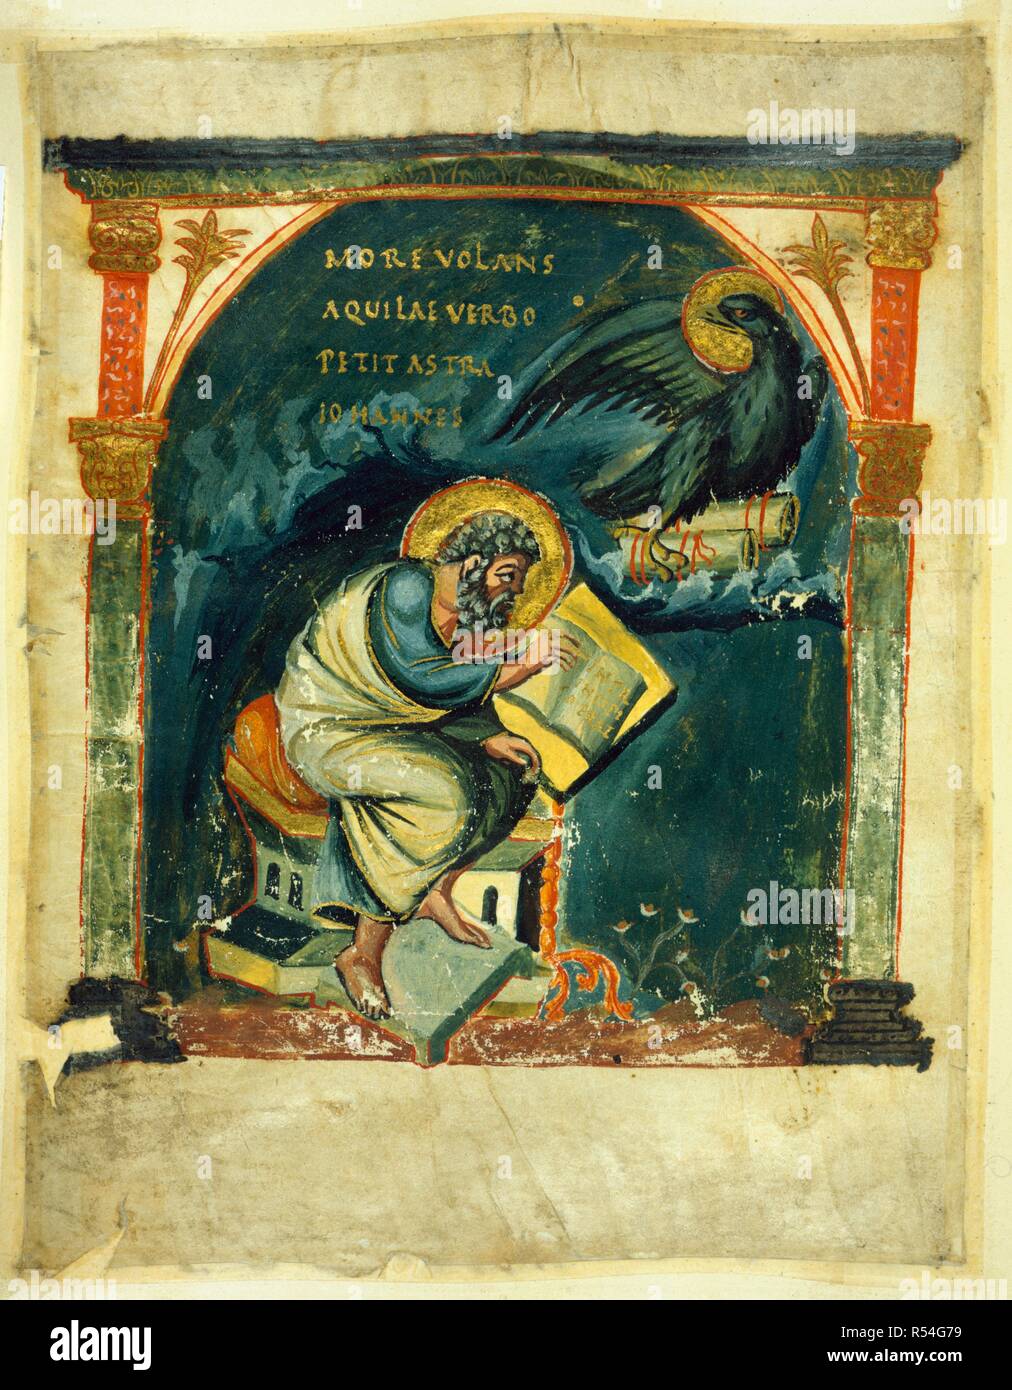 St. John seated. Coronation Gospels. S. Netherlands [Lobbes, near Liege]; circa 897-900. [Whole folio] St. John writing his gospel, with his symbol, the eagle, holding a scroll. The gospels were possibly a gift from Emperor Otto I of Germany to Athelstan, who presented them to Christ Church, Canterbury, and were used as the Coronation Book of the Anglo Saxon kings  Image taken from Coronation Gospels.  Originally published/produced in S. Netherlands [Lobbes, near Liege]; circa 897-900. . Source: Cotton Tiberius A. II, f.164v. Language: Latin. Stock Photo